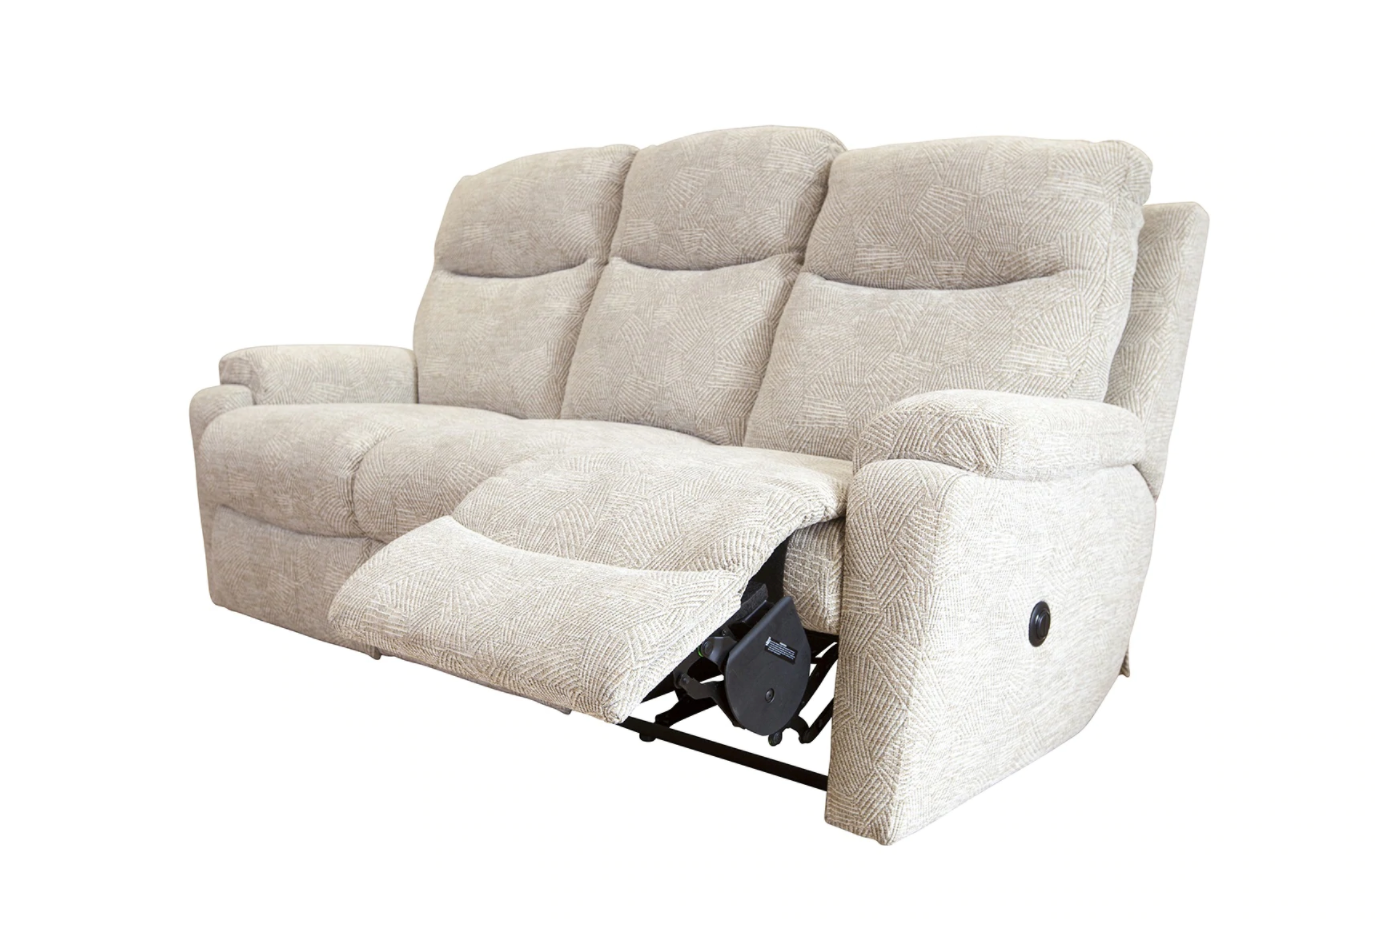 Townley 3 Seater Power Reclining Sofa